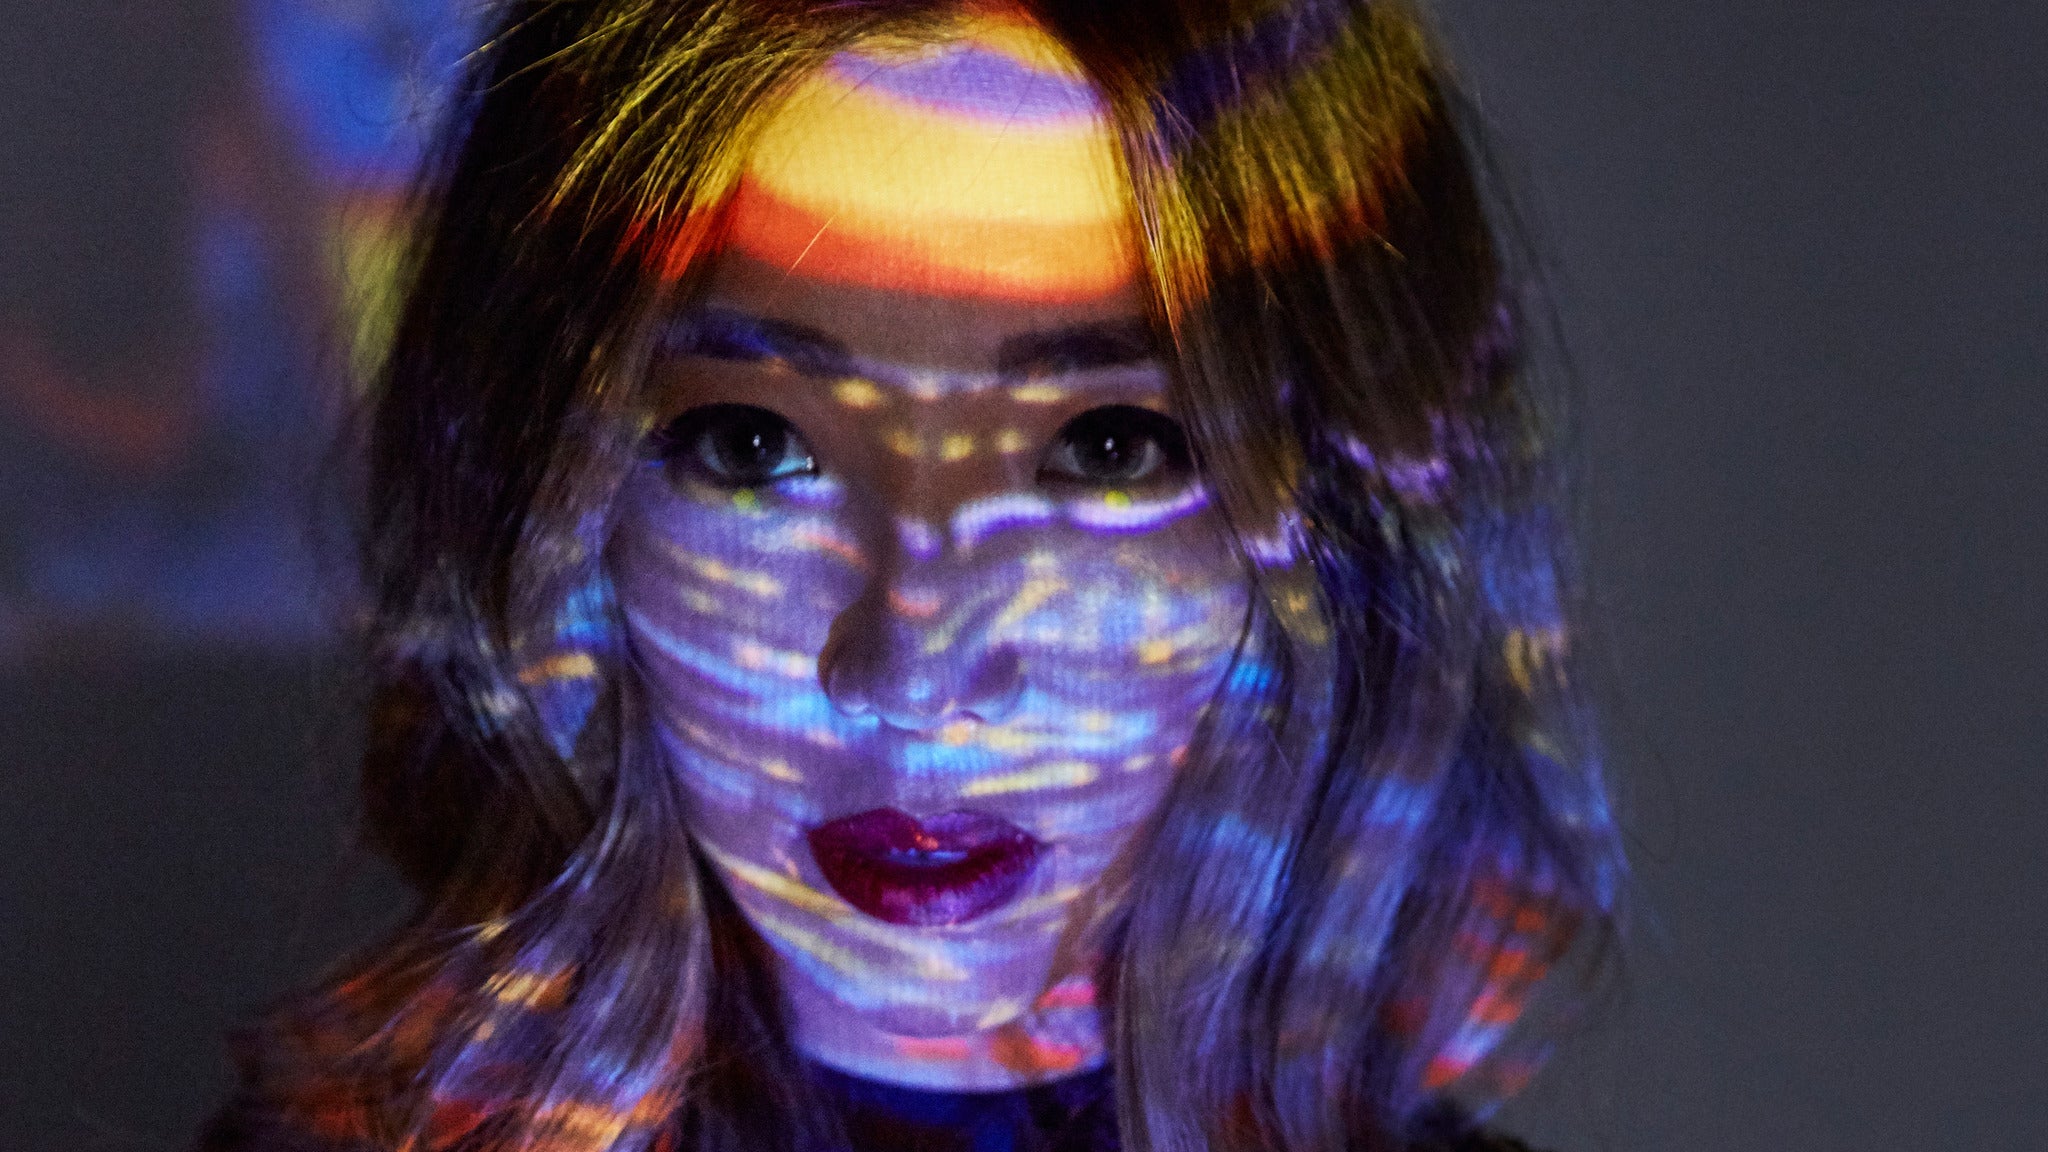 Image used with permission from Ticketmaster | Tokimonsta tickets